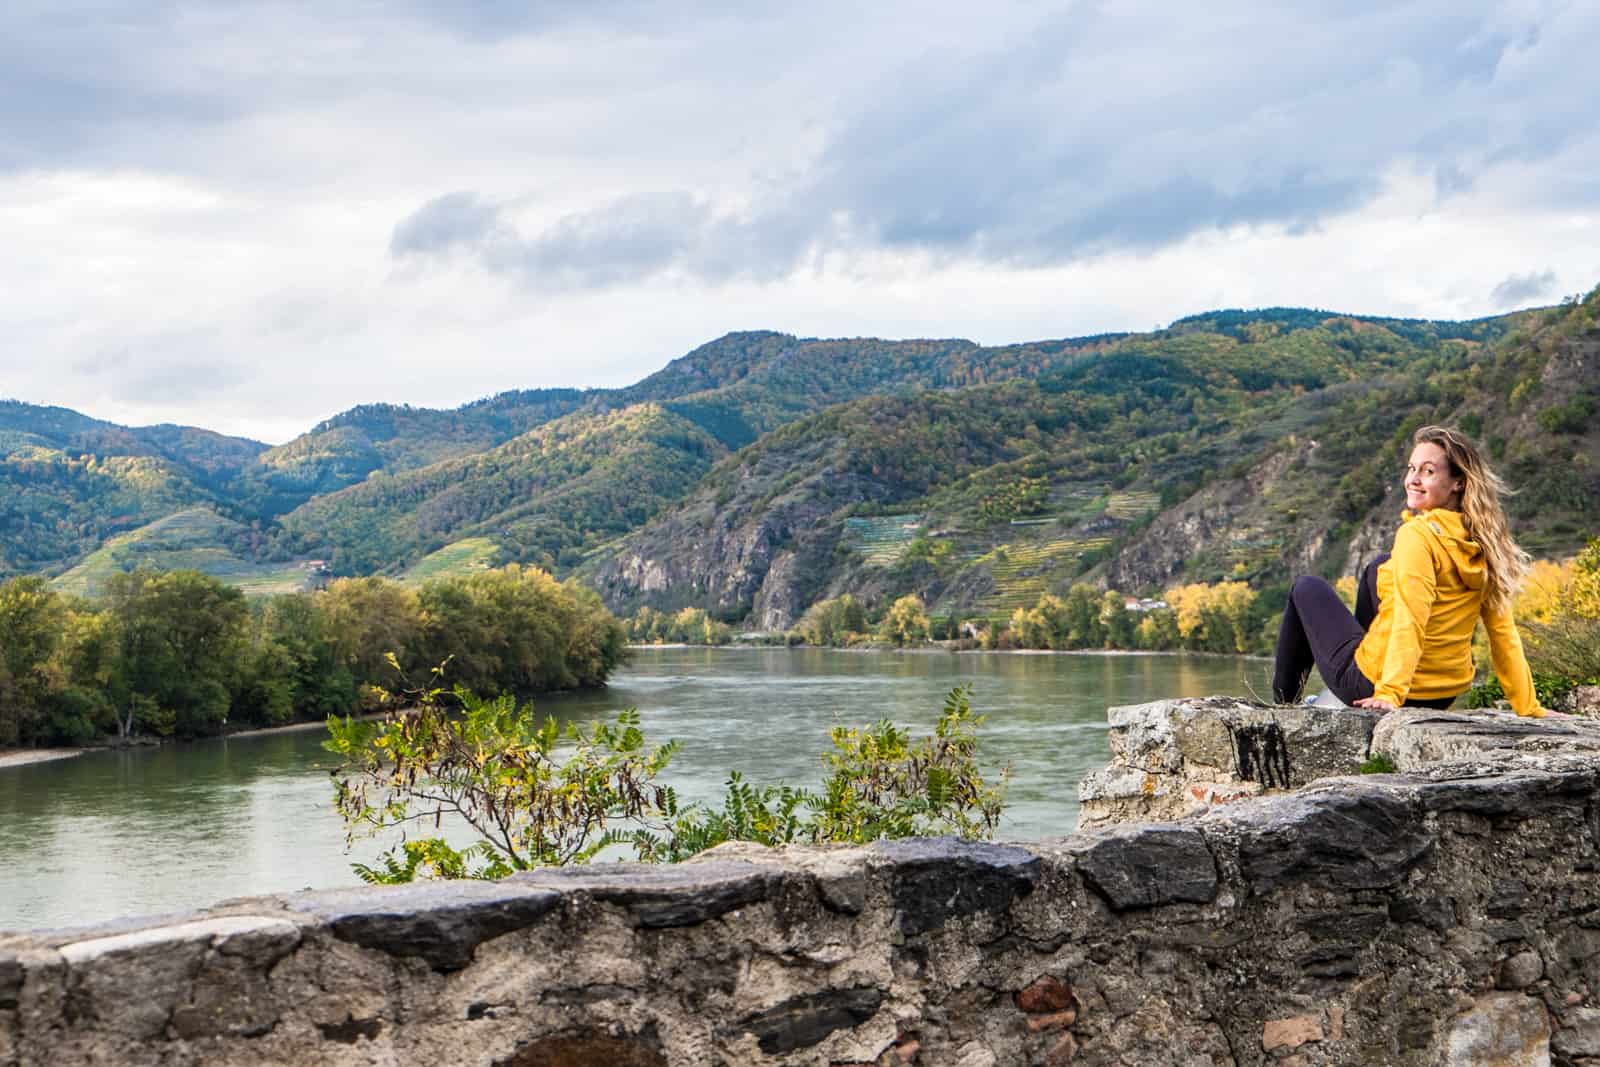 A woman is a yellow jacket sitting on the stone walls of the Wachau Valley Austria overlooking the Danube River